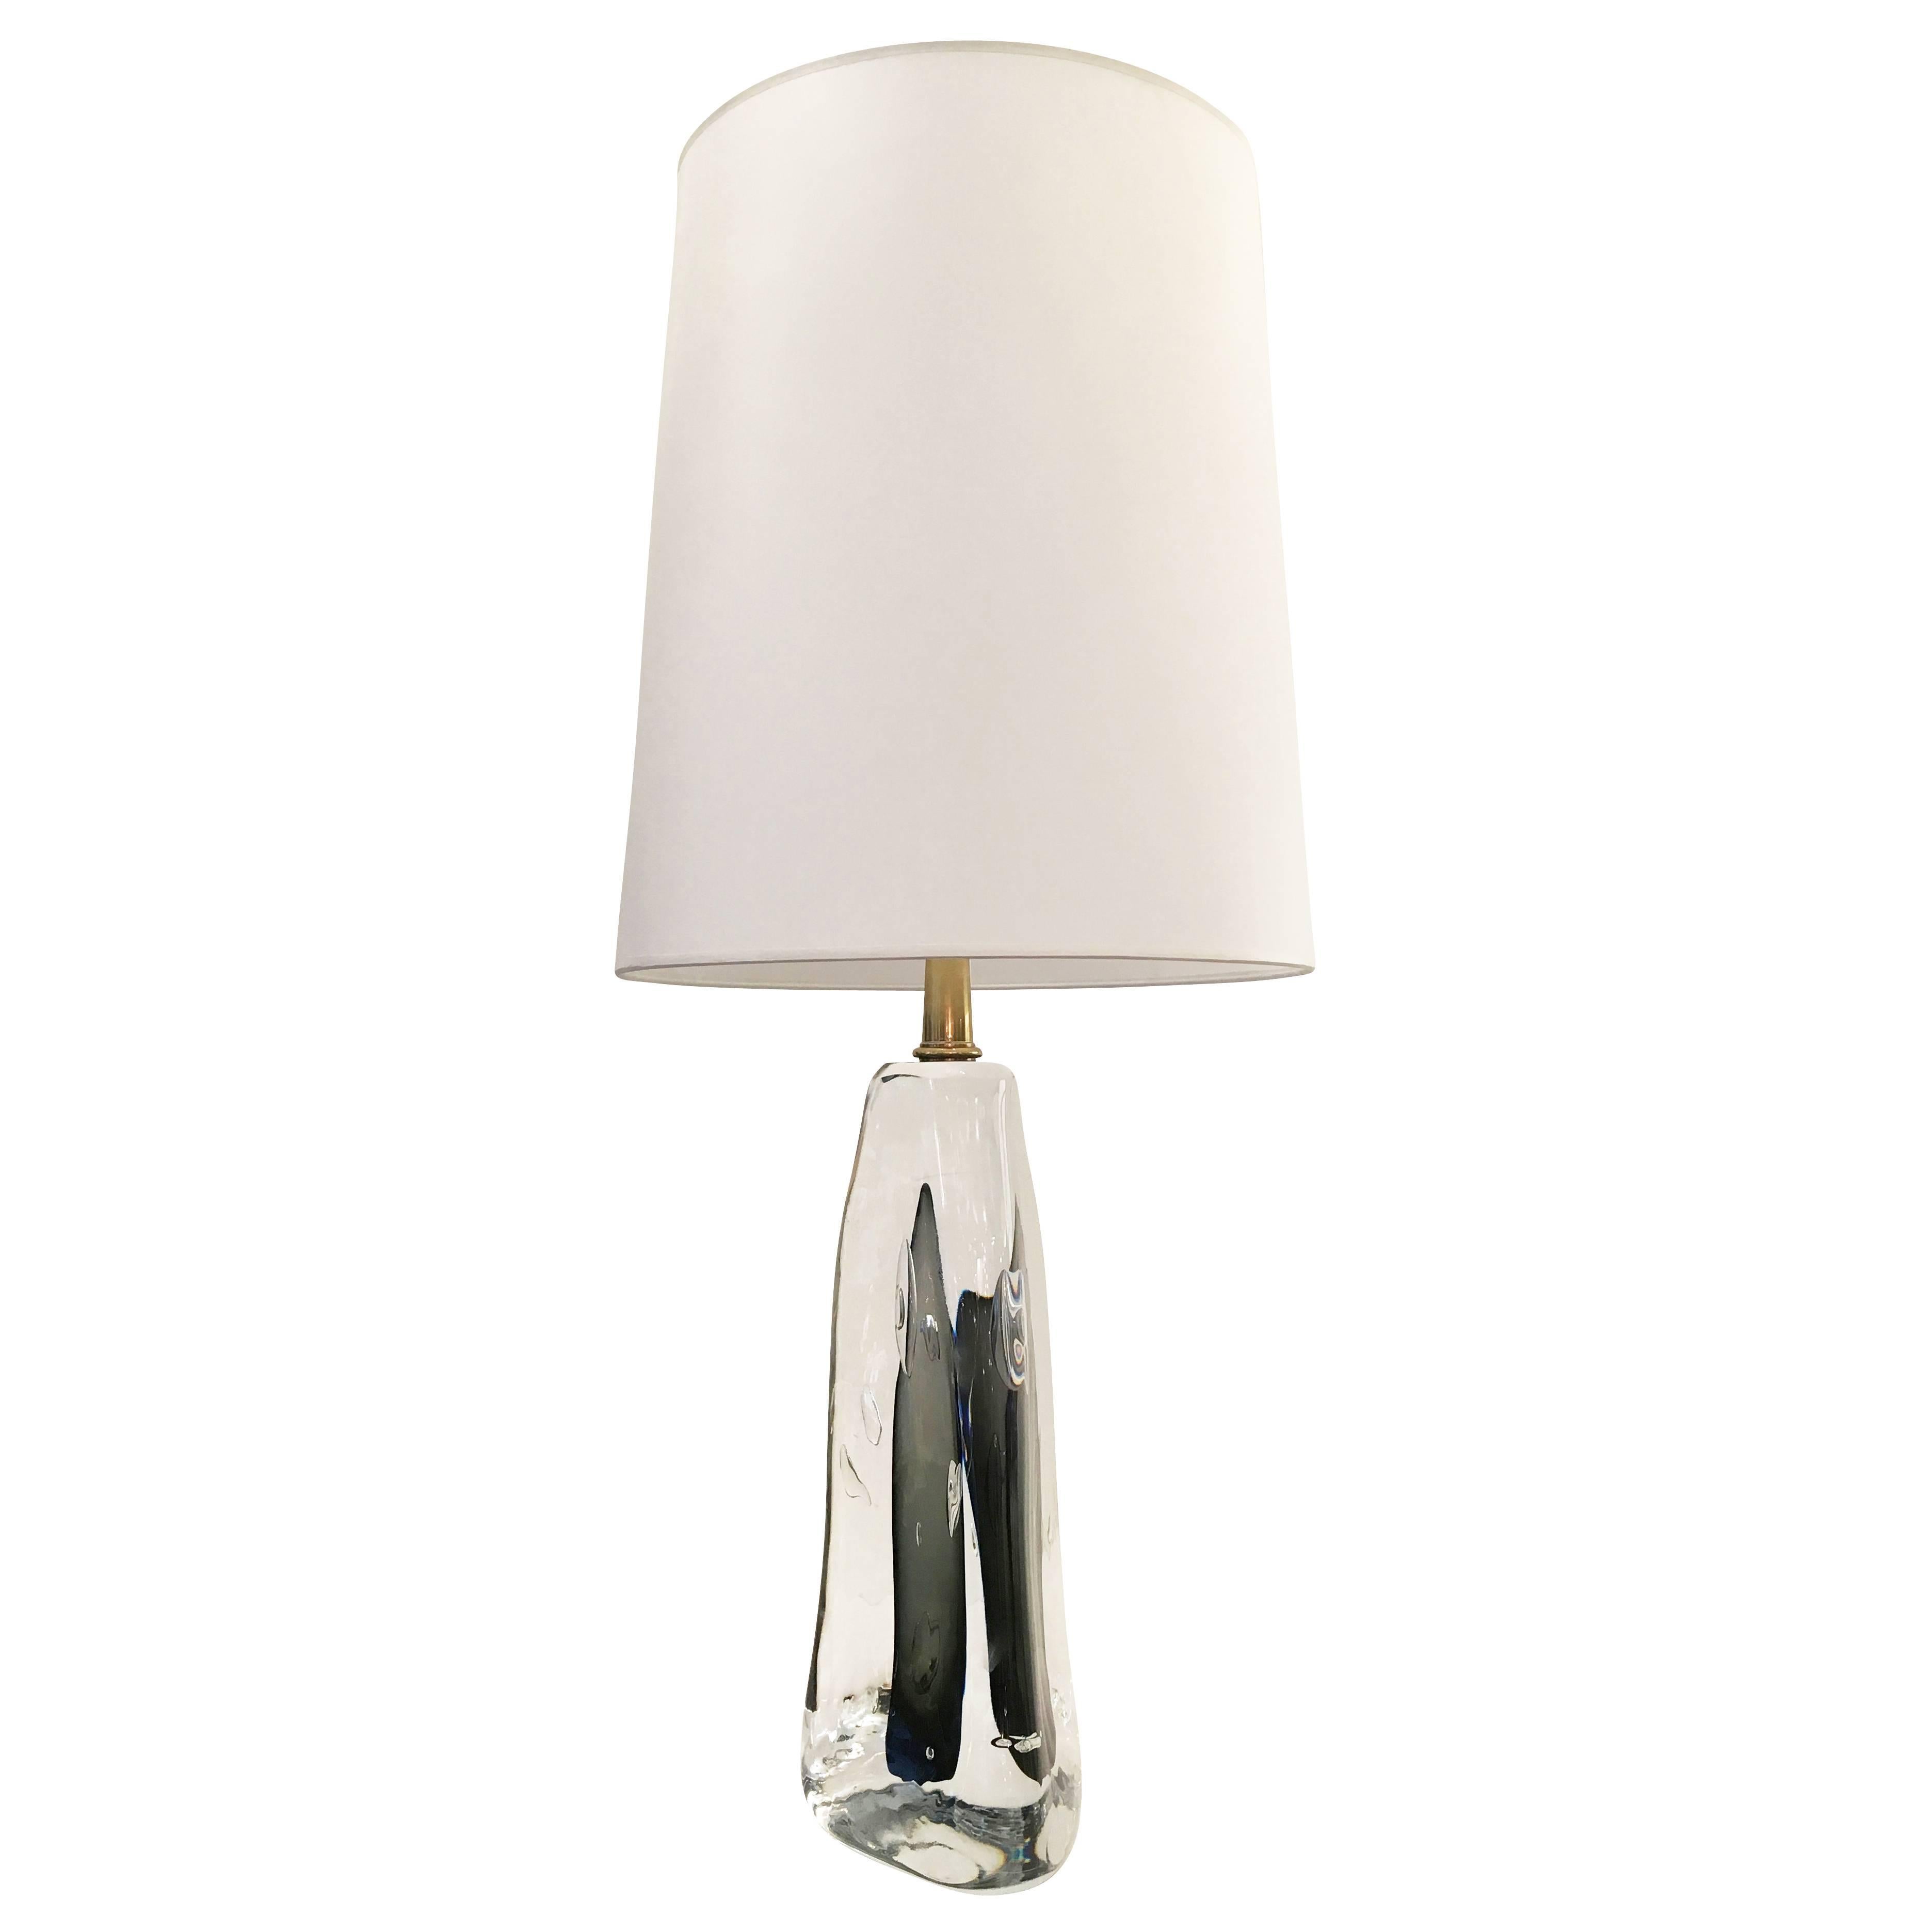 Beautiful handmade lamp featuring a triangular glass amber base. The clear glass is infused with bubbles and a gray glass core. Hardware is brass. Manufactured by Esperia exclusively for Gaspare Asaro. Shade not included. Can be made with different